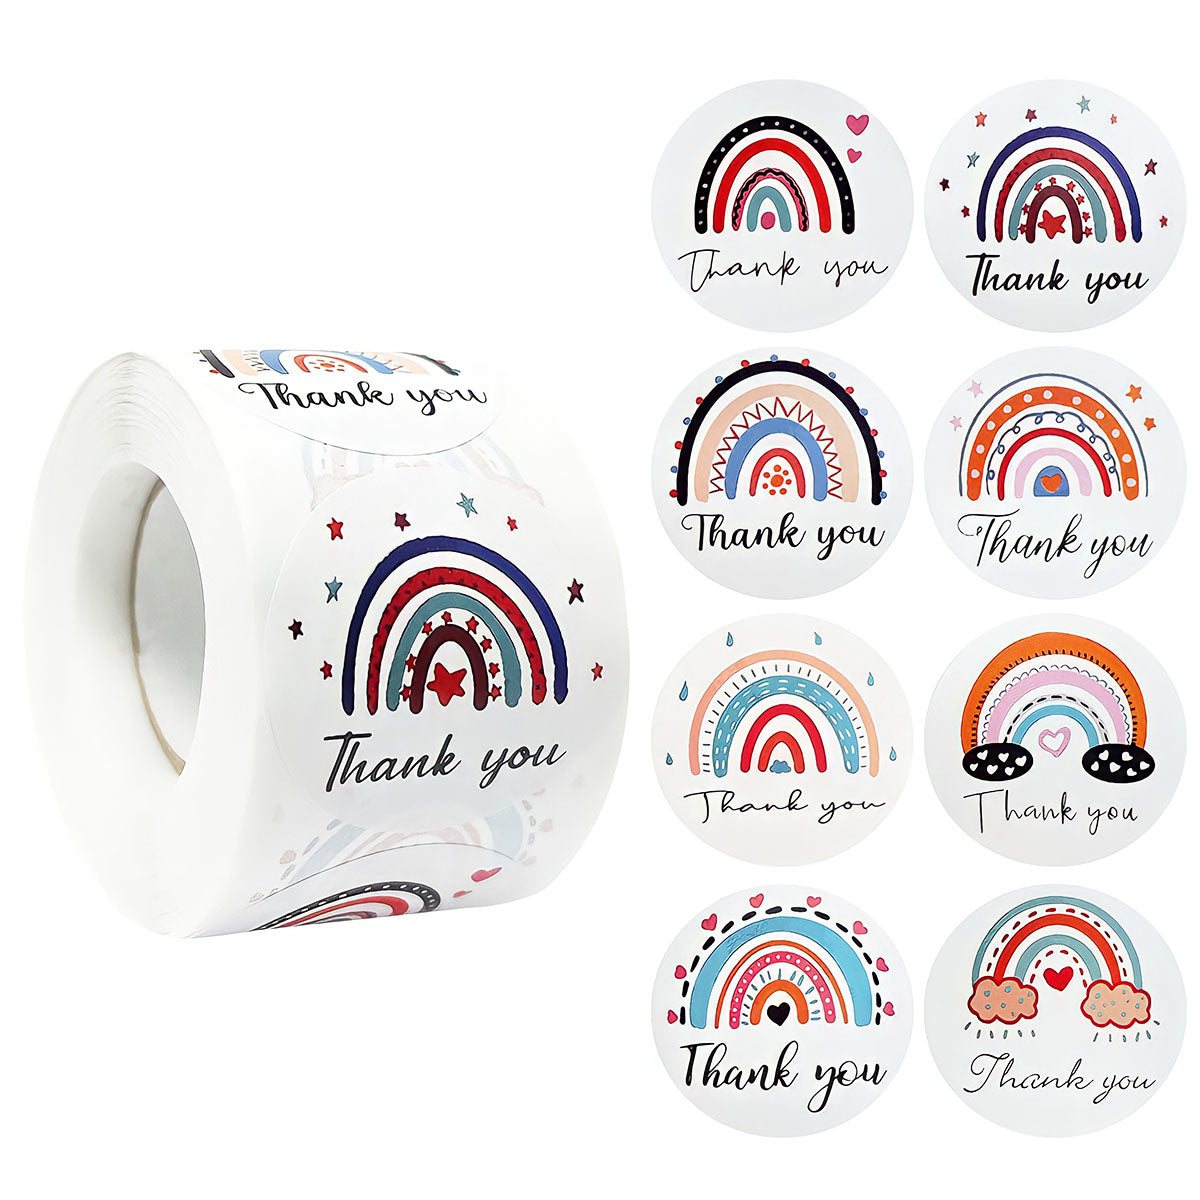 Wrapables 1.5 inch Rainbow Thank You Stickers Roll, Sealing Stickers and Labels for Boxes, Envelopes, Bags, Small Businesses, Weddings, Parties (500pcs)